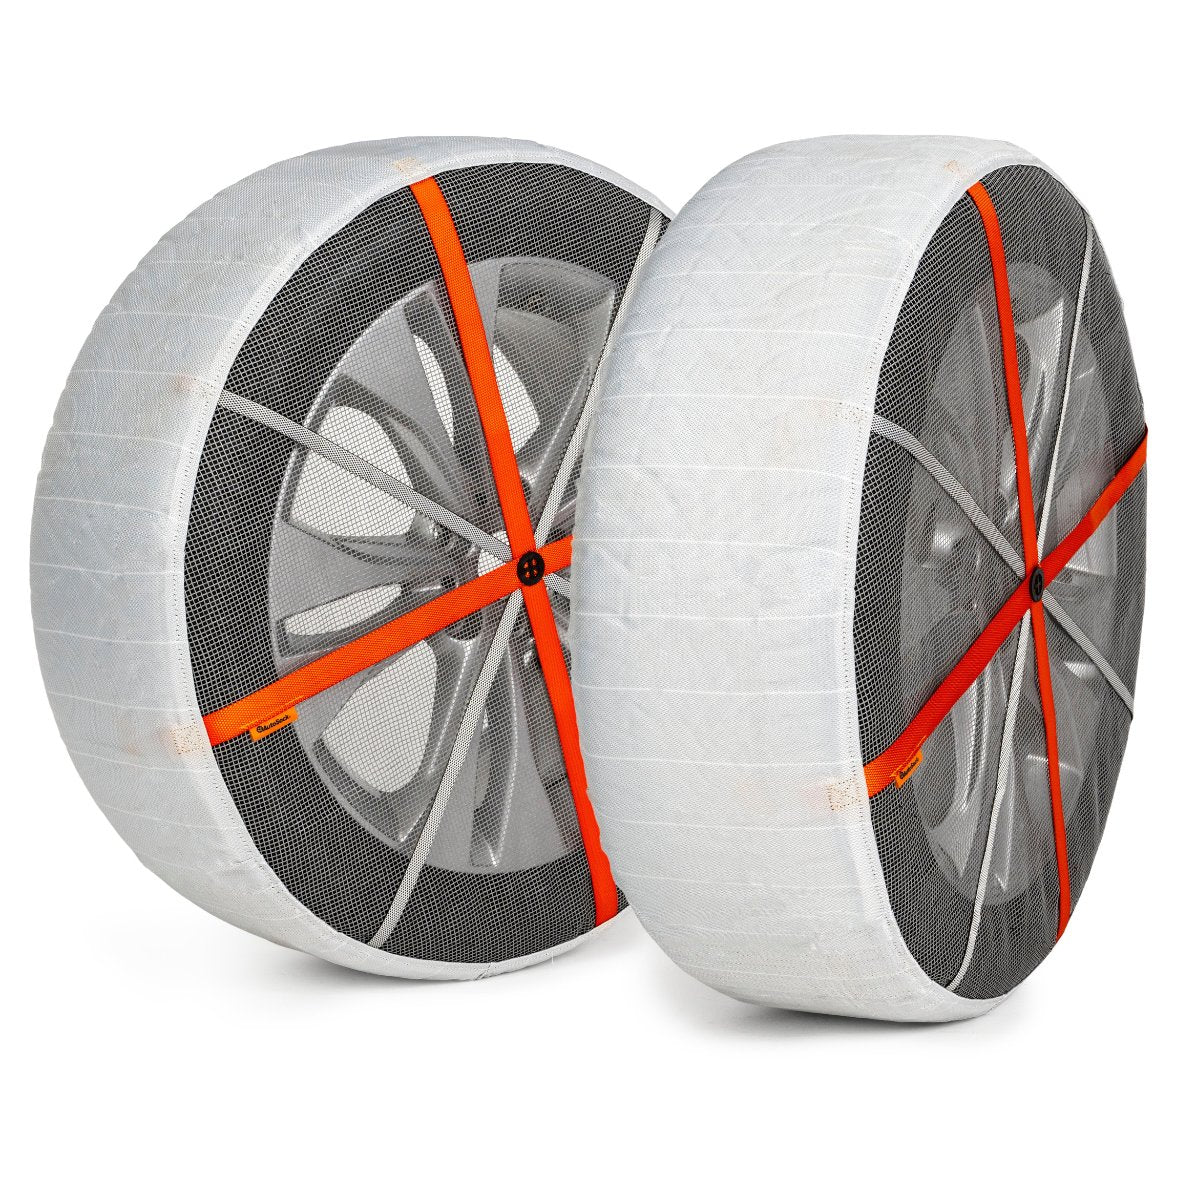 Pair of AutoSock textile snow chains installed on two wheels in front of white background showing product frontside AL 84 AL84